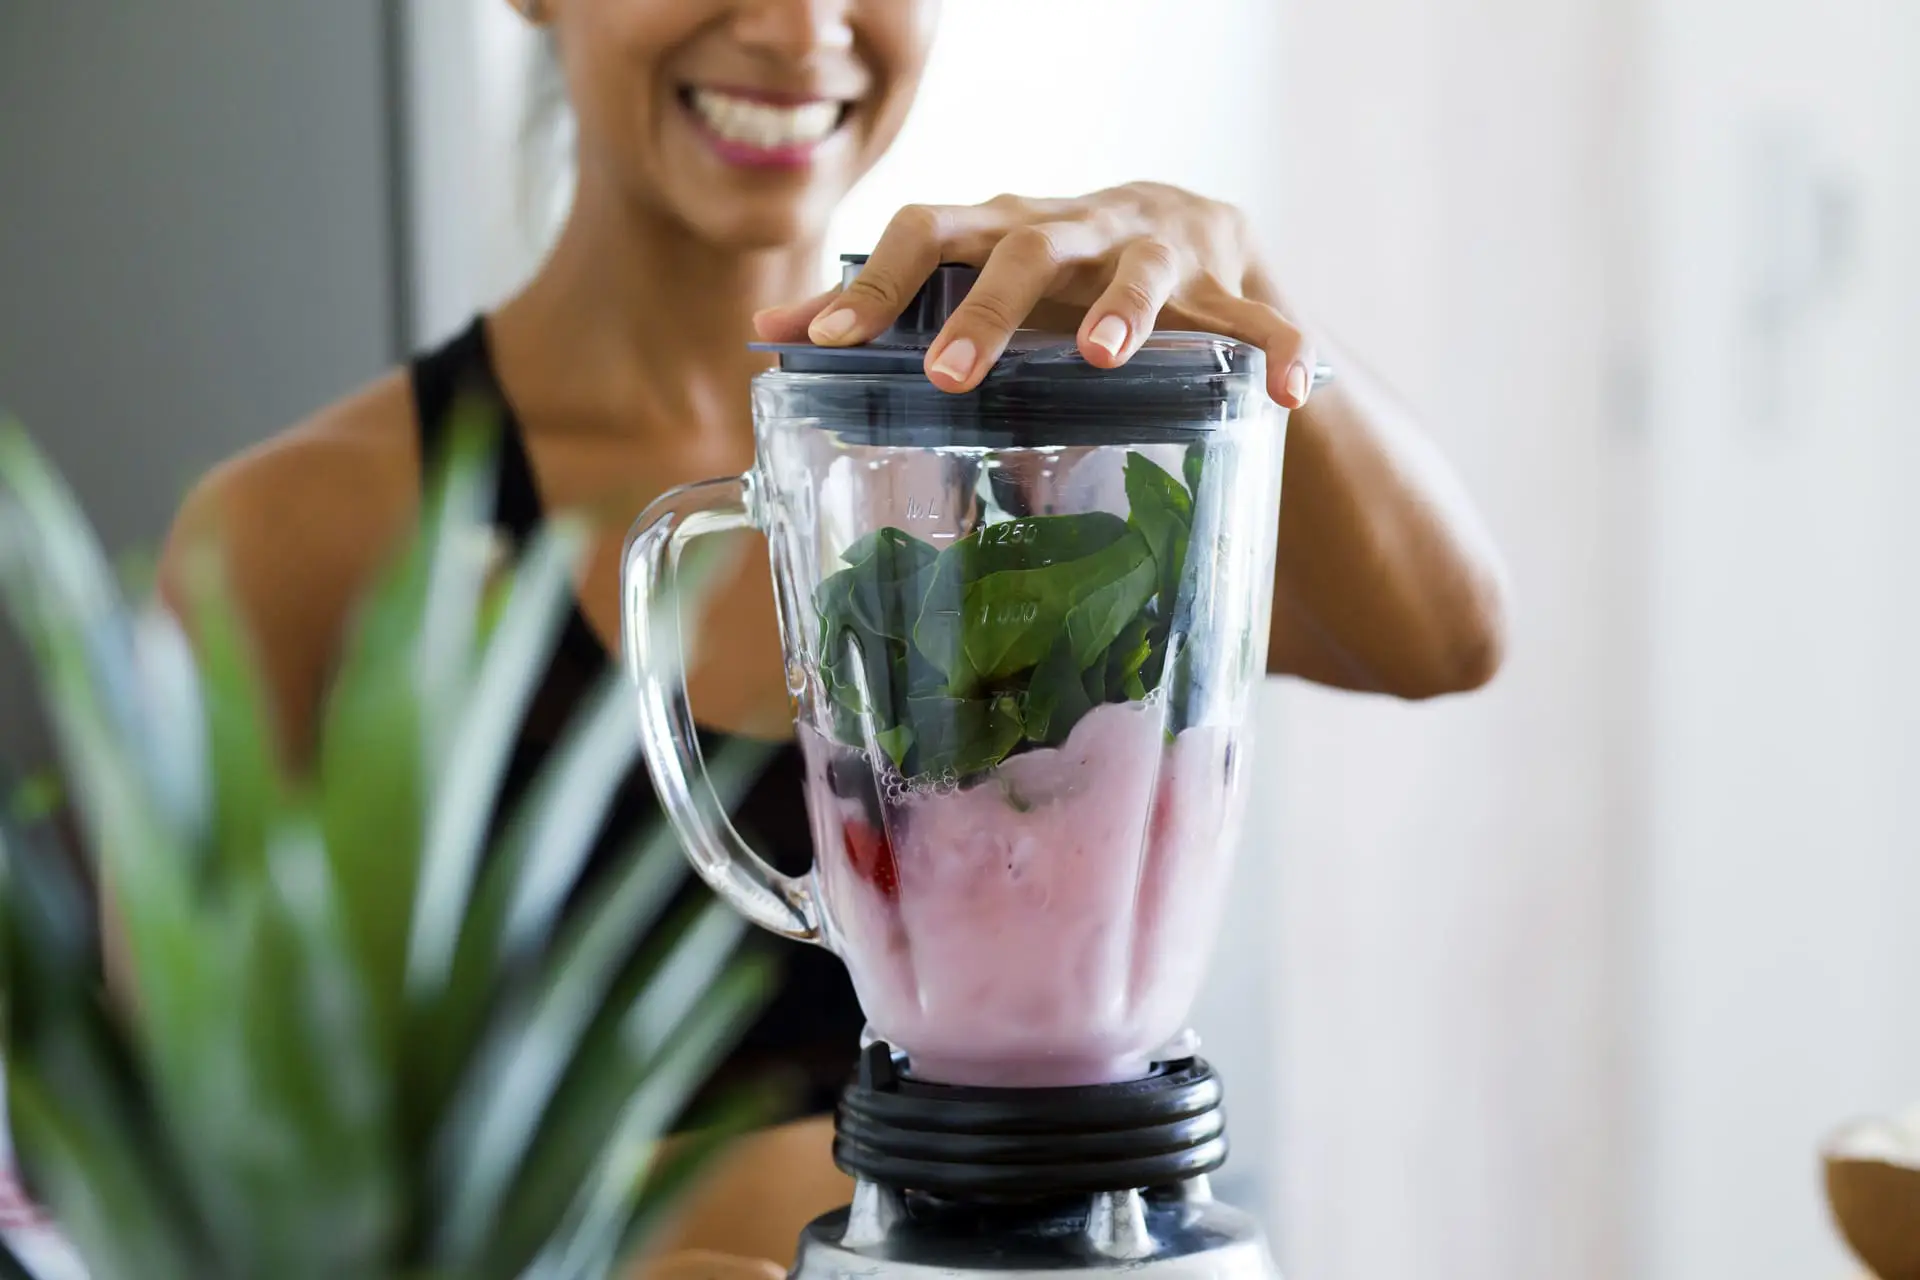 Woman is making fertility smoothie